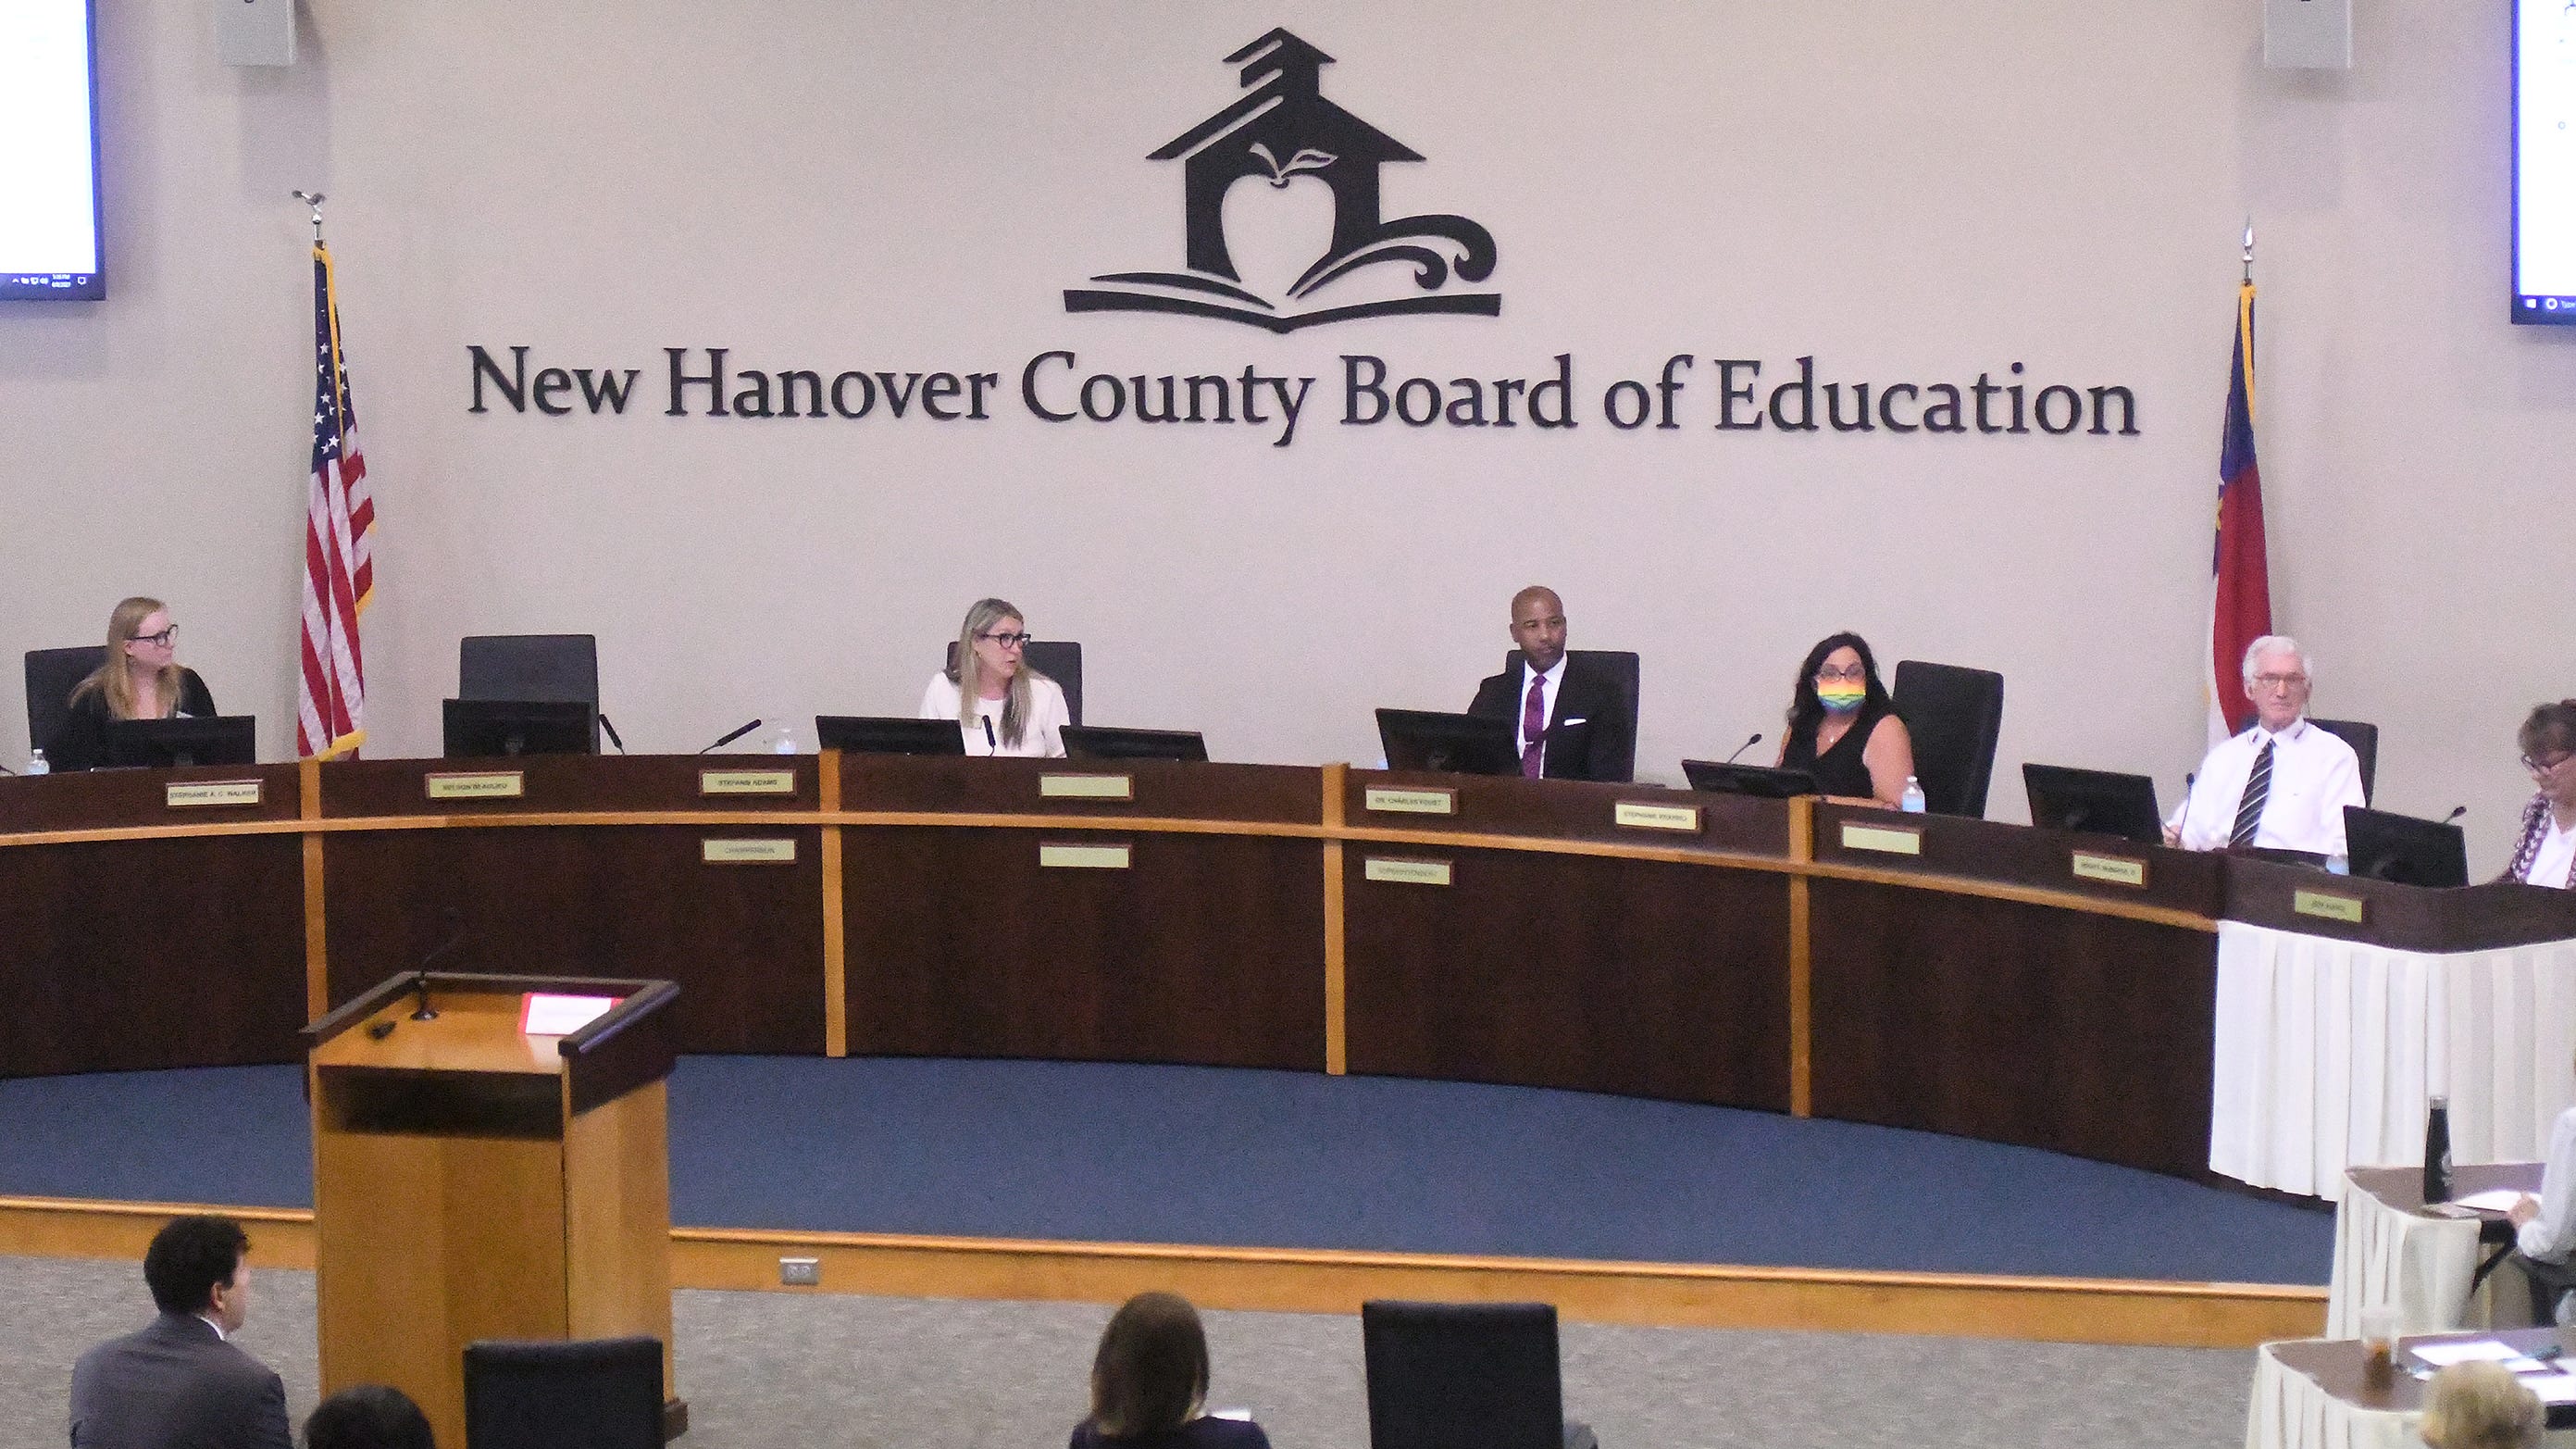 2022-new-hanover-school-board-candidates-time-to-refocus-on-students